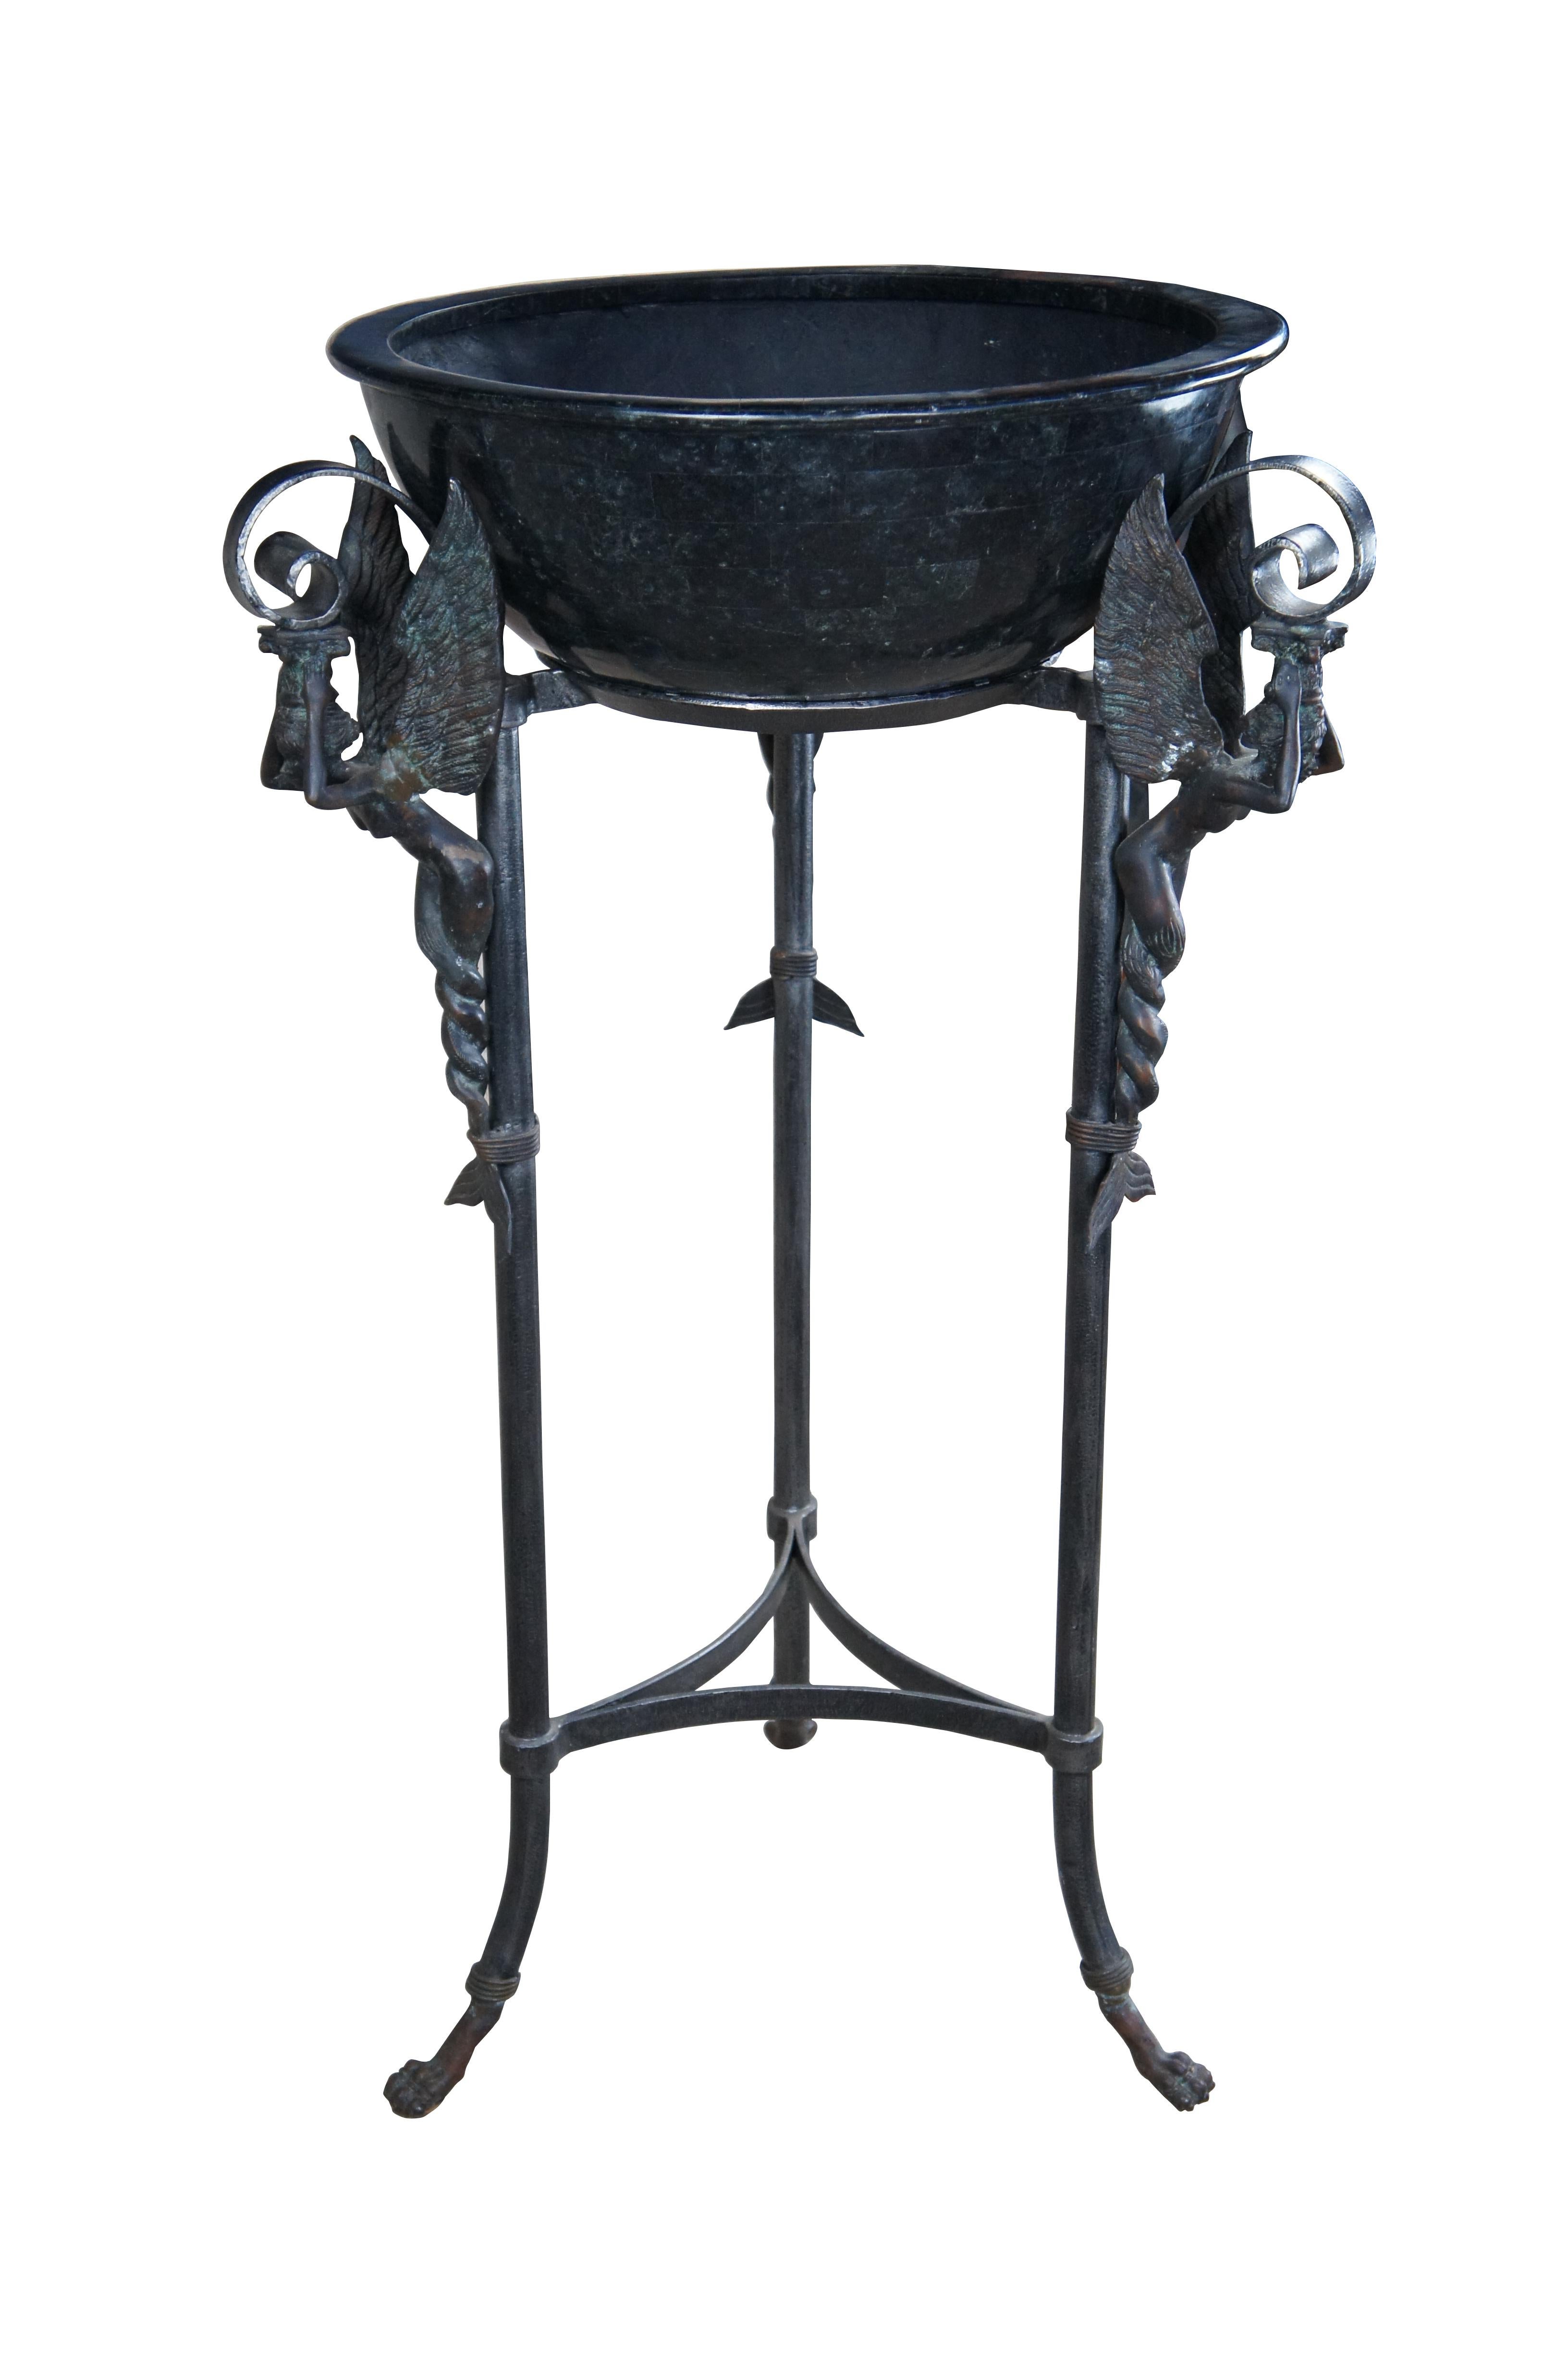 An impressive cauldron or planter by Maitland-Smith, circa 1990s. Made from iron and bronze in French Empire styling. Features a tessellated marble plater or bowl over a figured scrolled iron and bronze tripod base. The stand features figural winged